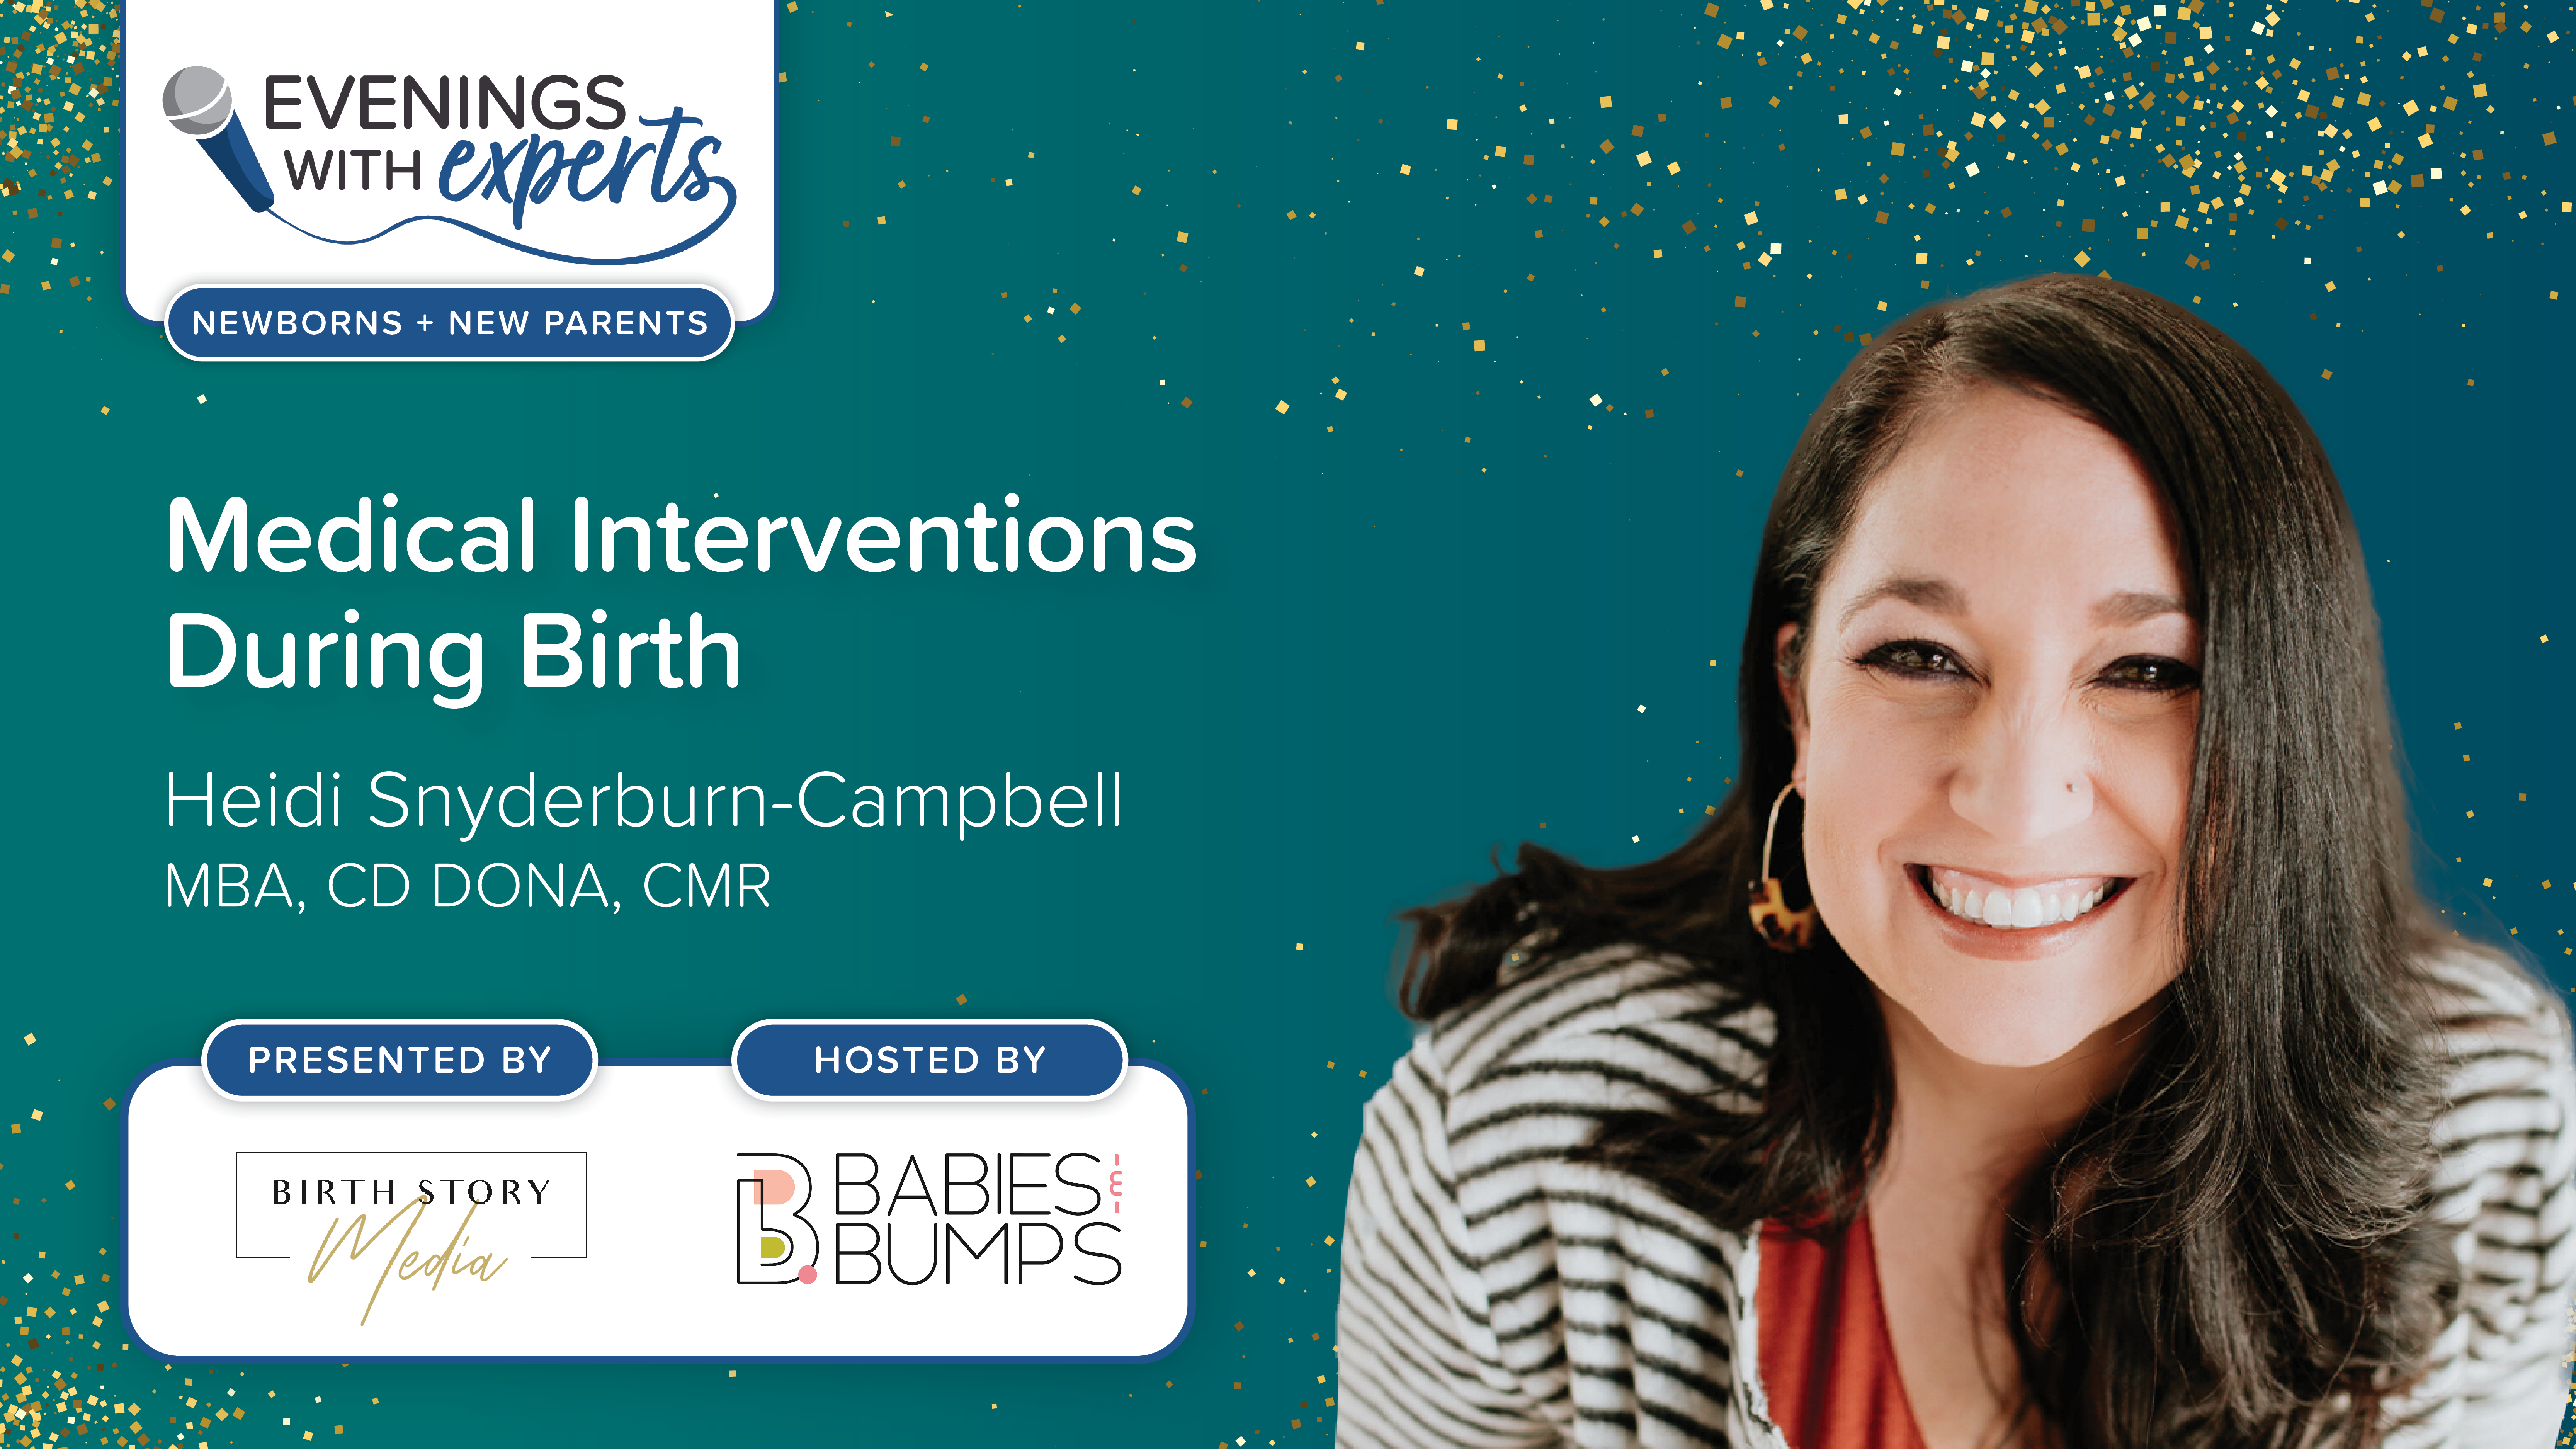 Evenings with Experts: Medical Interventions During Birth featuring Heidi Snyderburn-Campbell, MBA, CD DONA, CMR. Presented by Birthstory Academy. Hosted by Babies & Bumps.